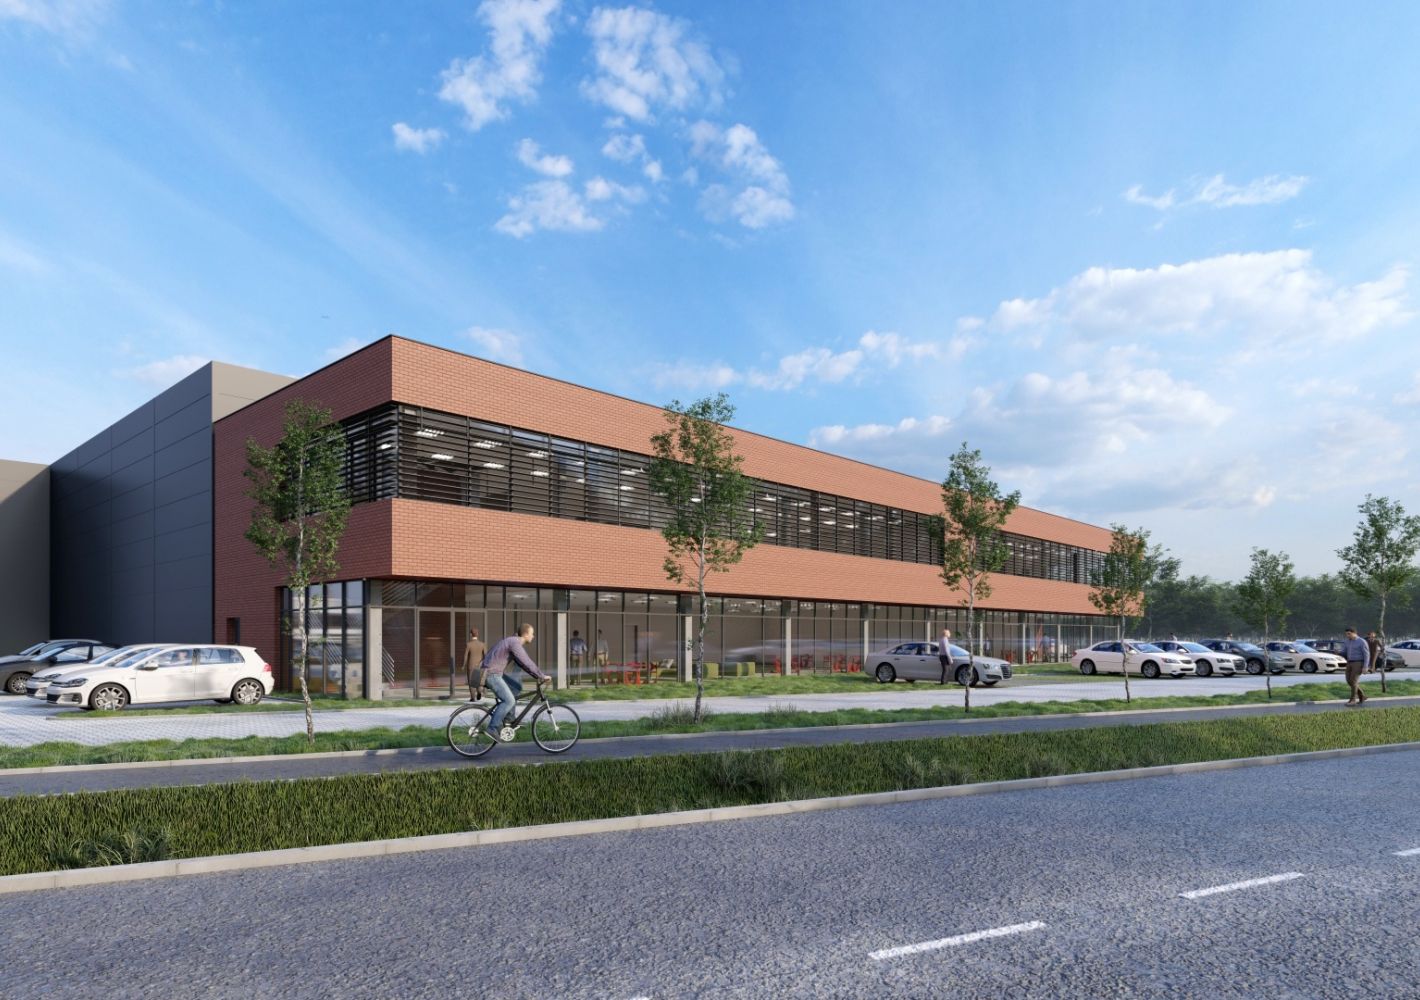 Jakon is building the warehouse in the Wrocław agglomeration